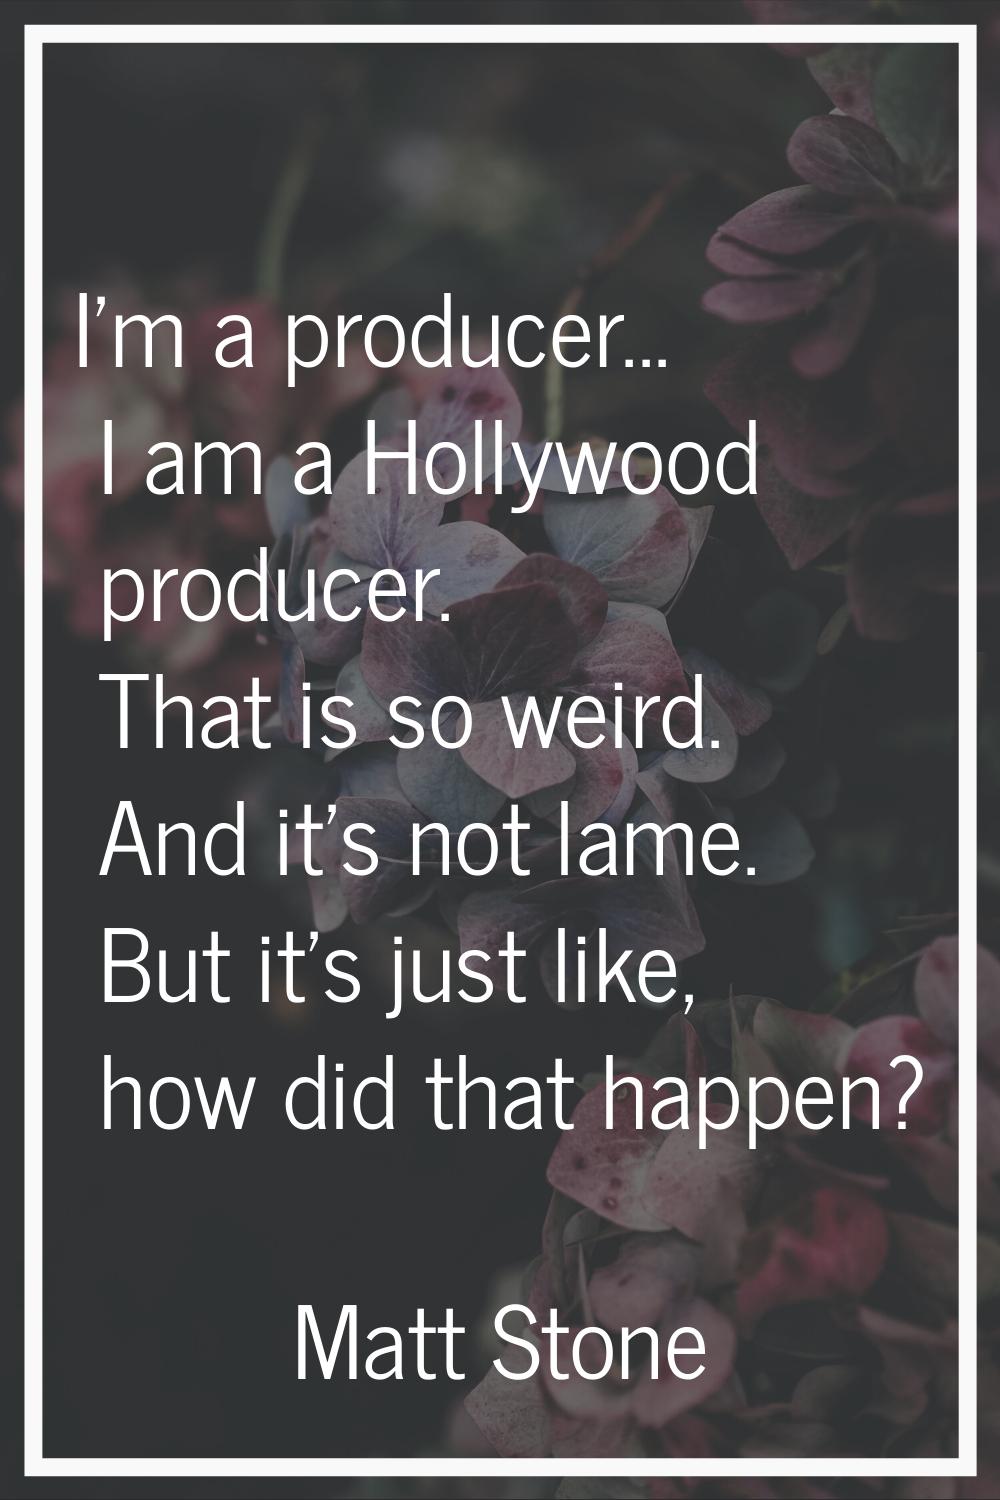 I'm a producer... I am a Hollywood producer. That is so weird. And it's not lame. But it's just lik